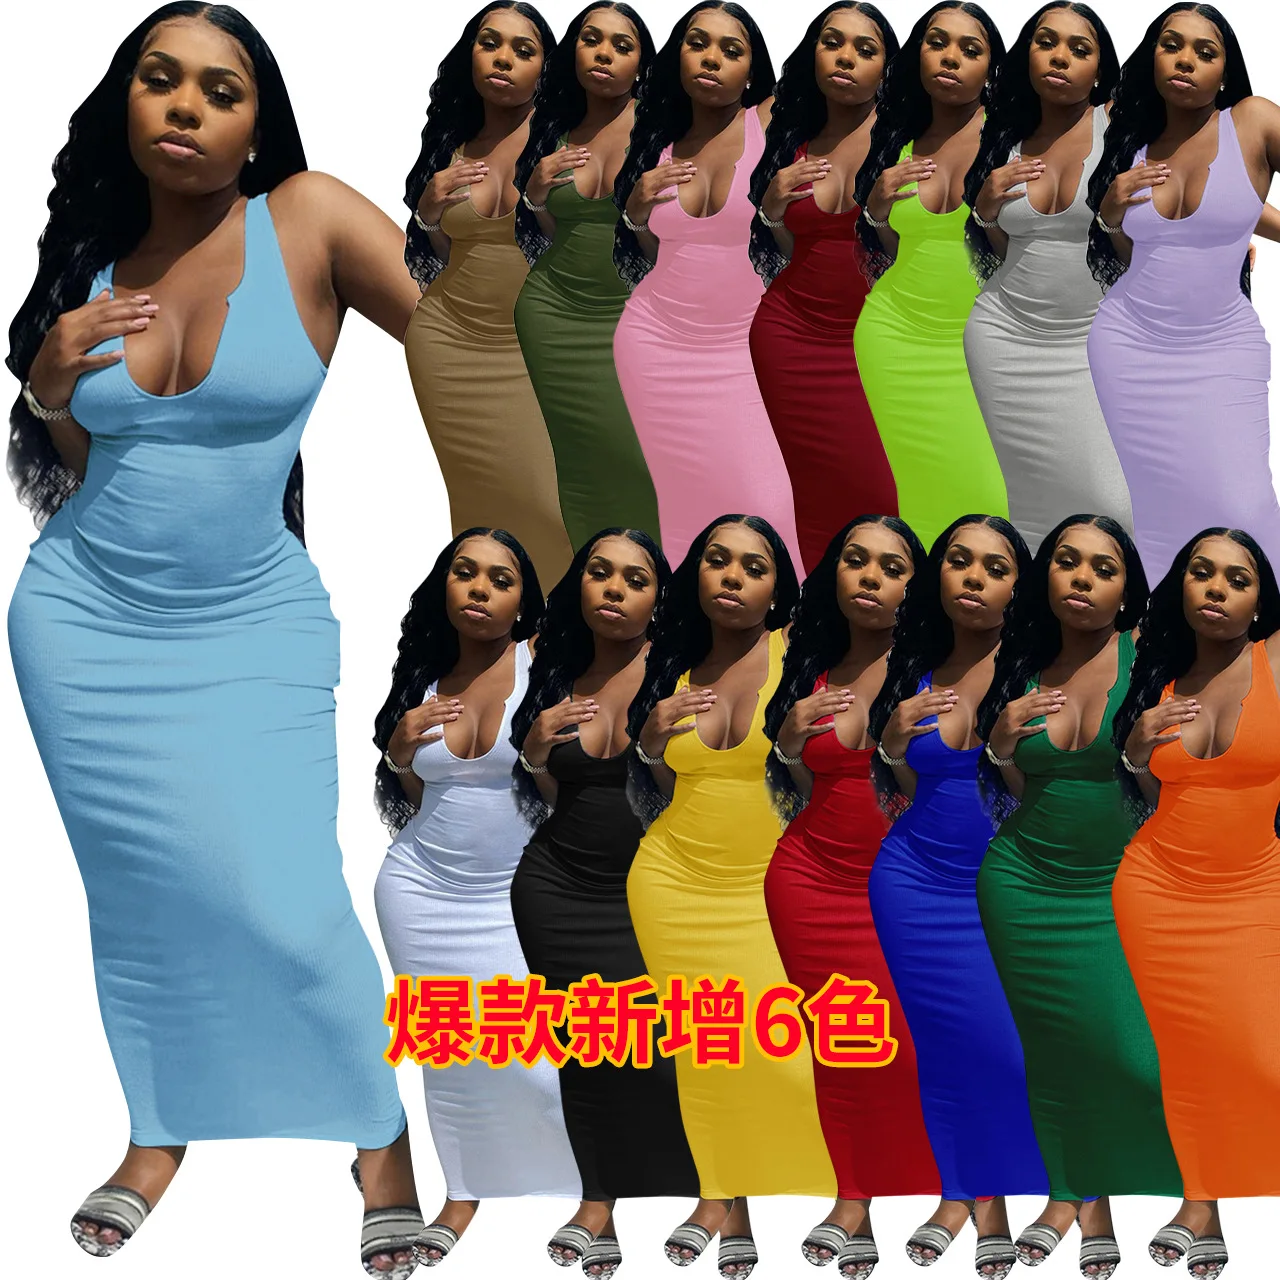 

2021 Hot sale Rib Knit Simple Round Neck Long Sleeve Bodycon Maxi Elegant Women Solid Outfit Spring Casual Party Long Dress, Picture shown